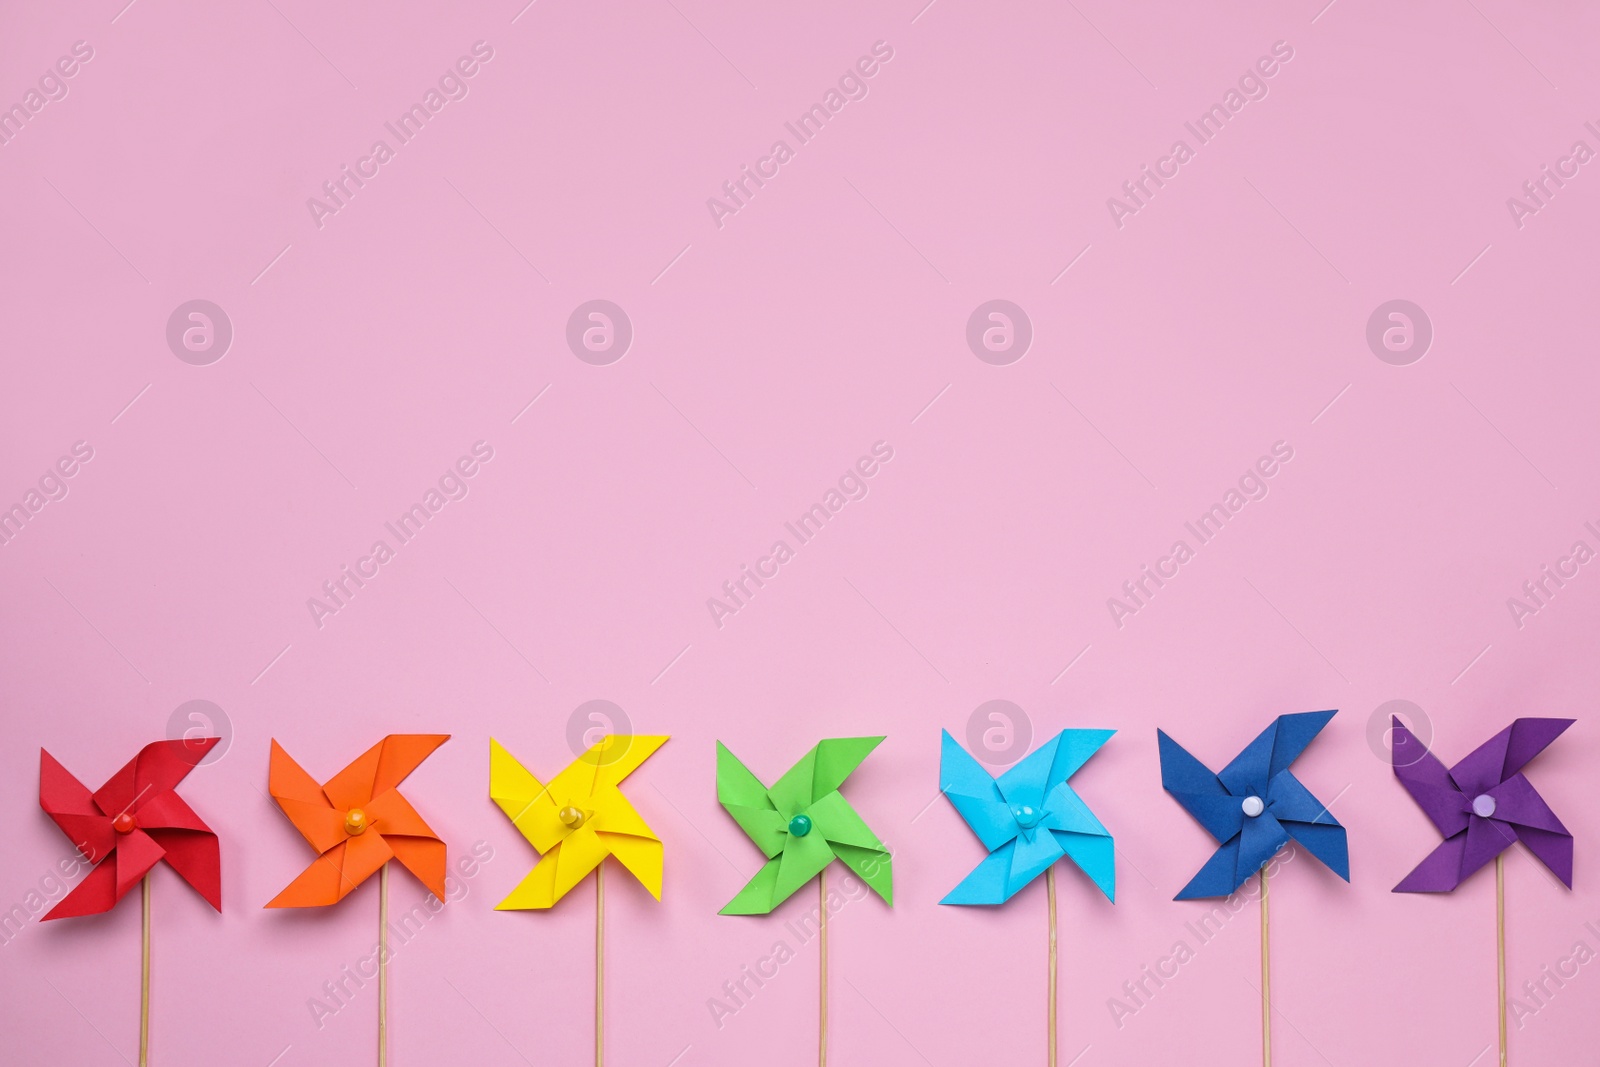 Photo of Colorful toy windmills on pink background, flat lay with space for text. Rainbow palette